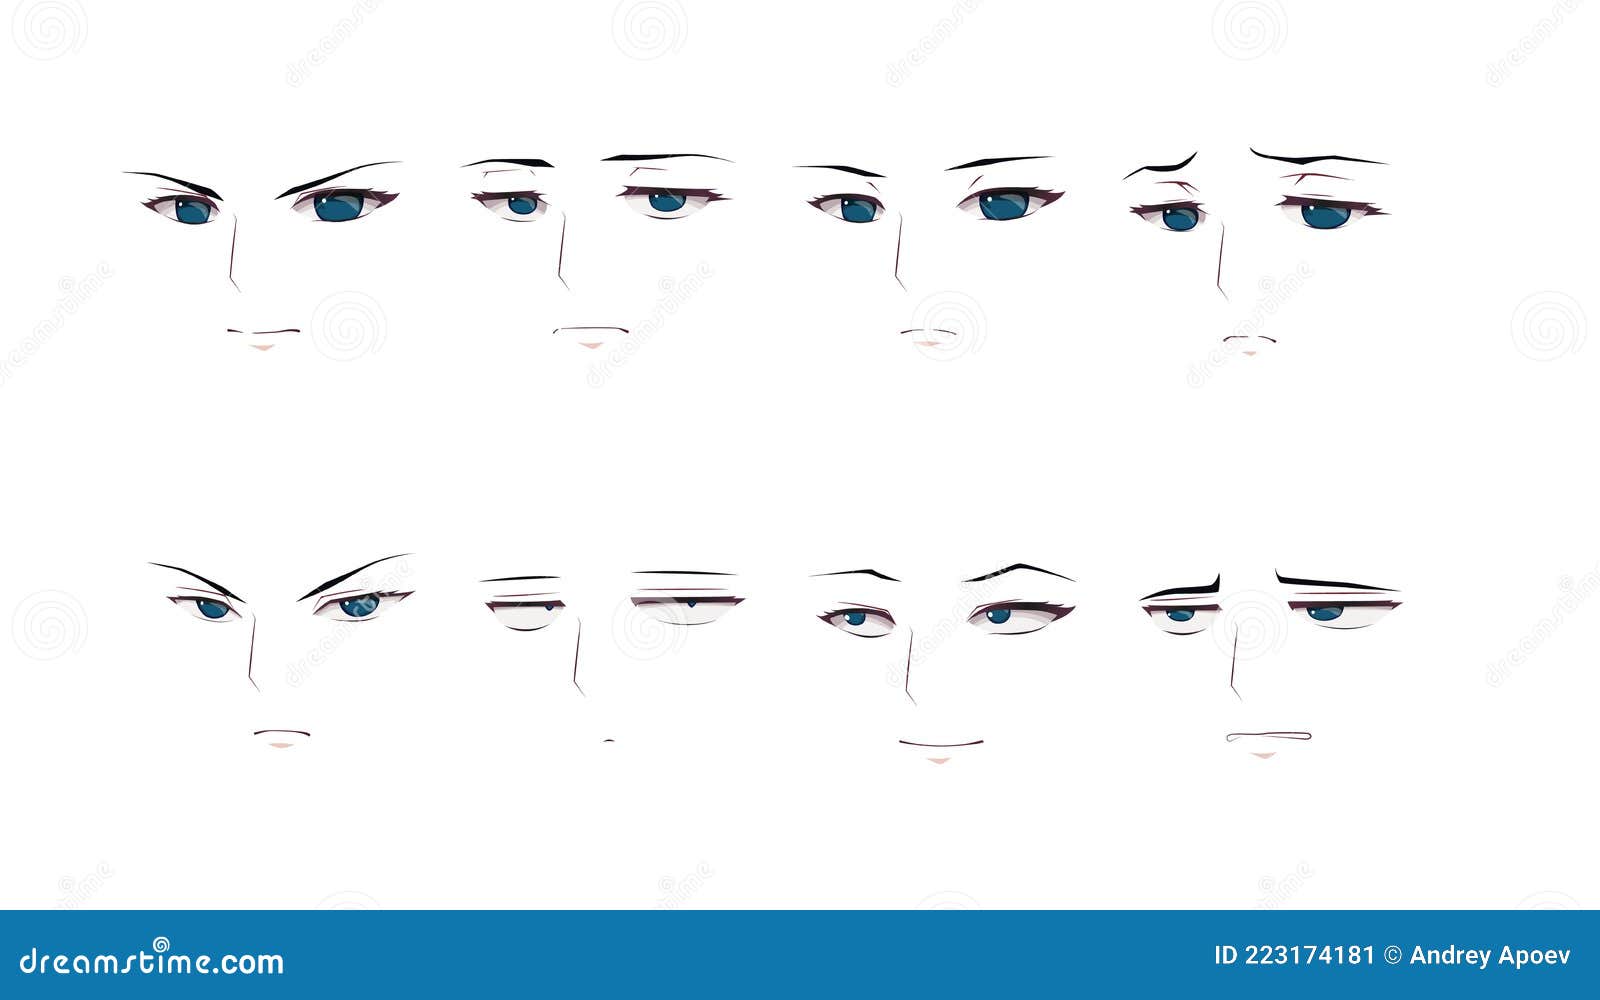 Anime and manga eyes Drawing Reference and Sketches for Artists